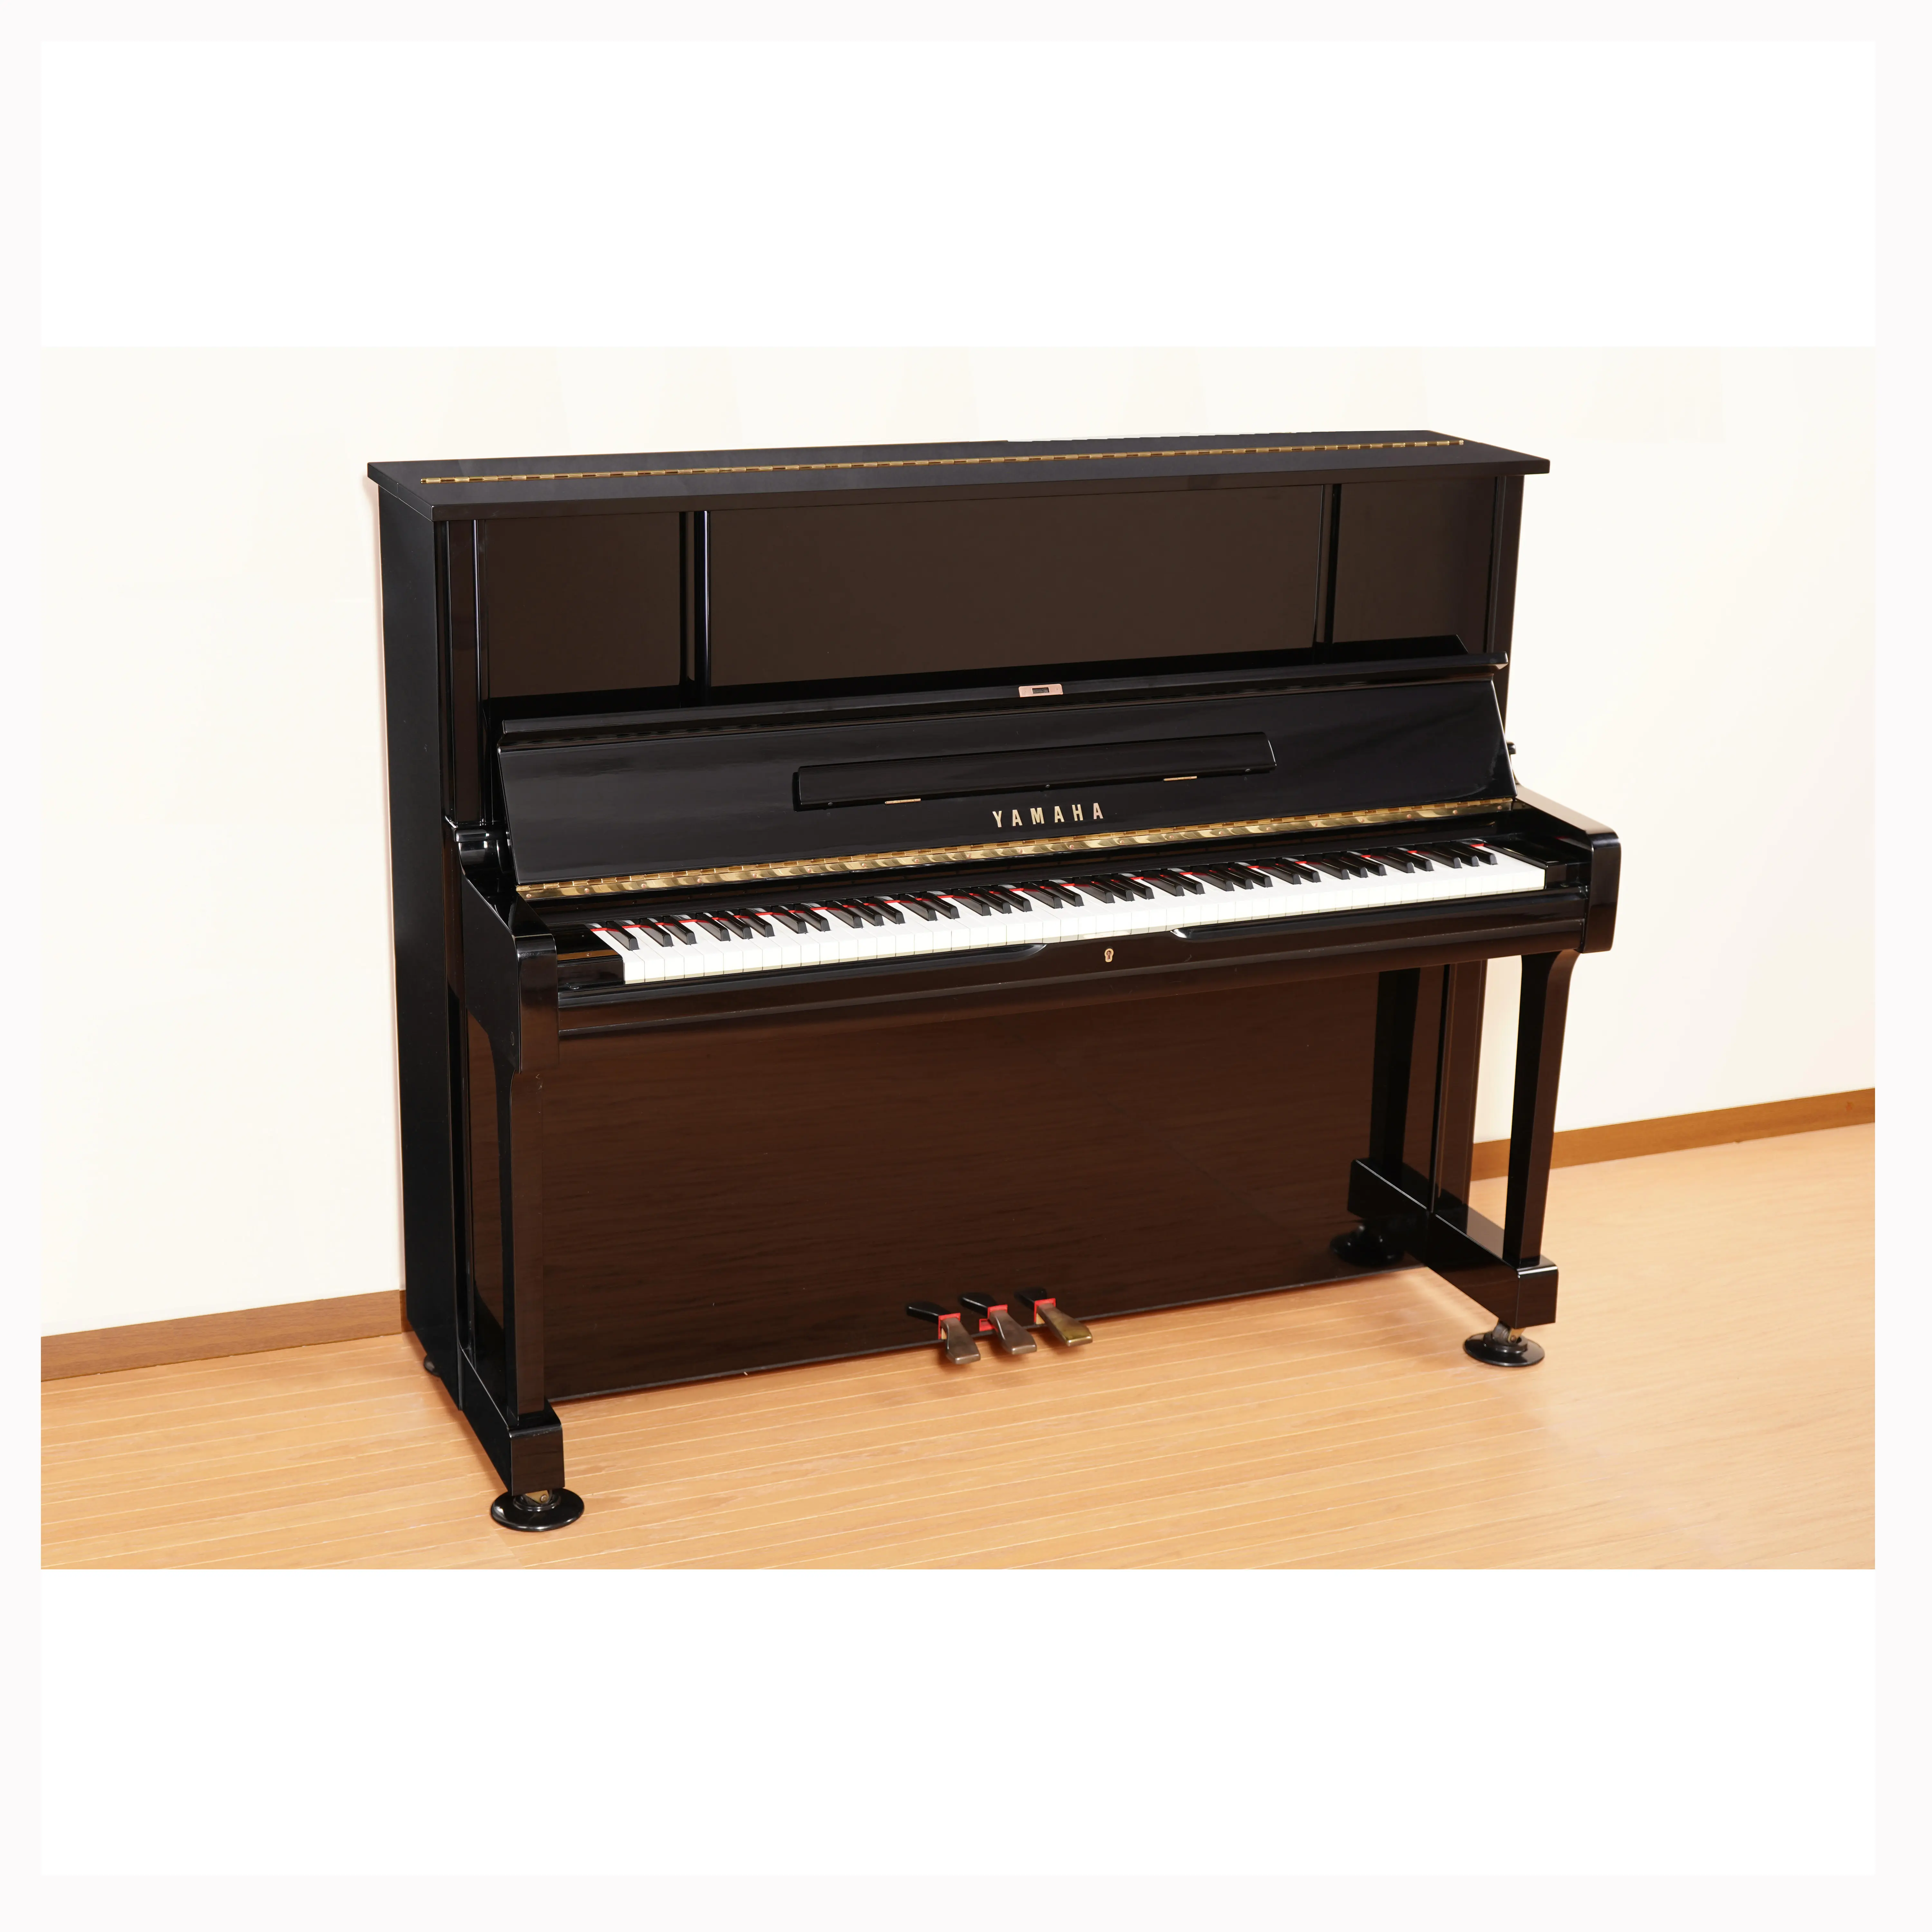 Wholesale 1982 to 1988 like-new appearance prices used pianos of Japan